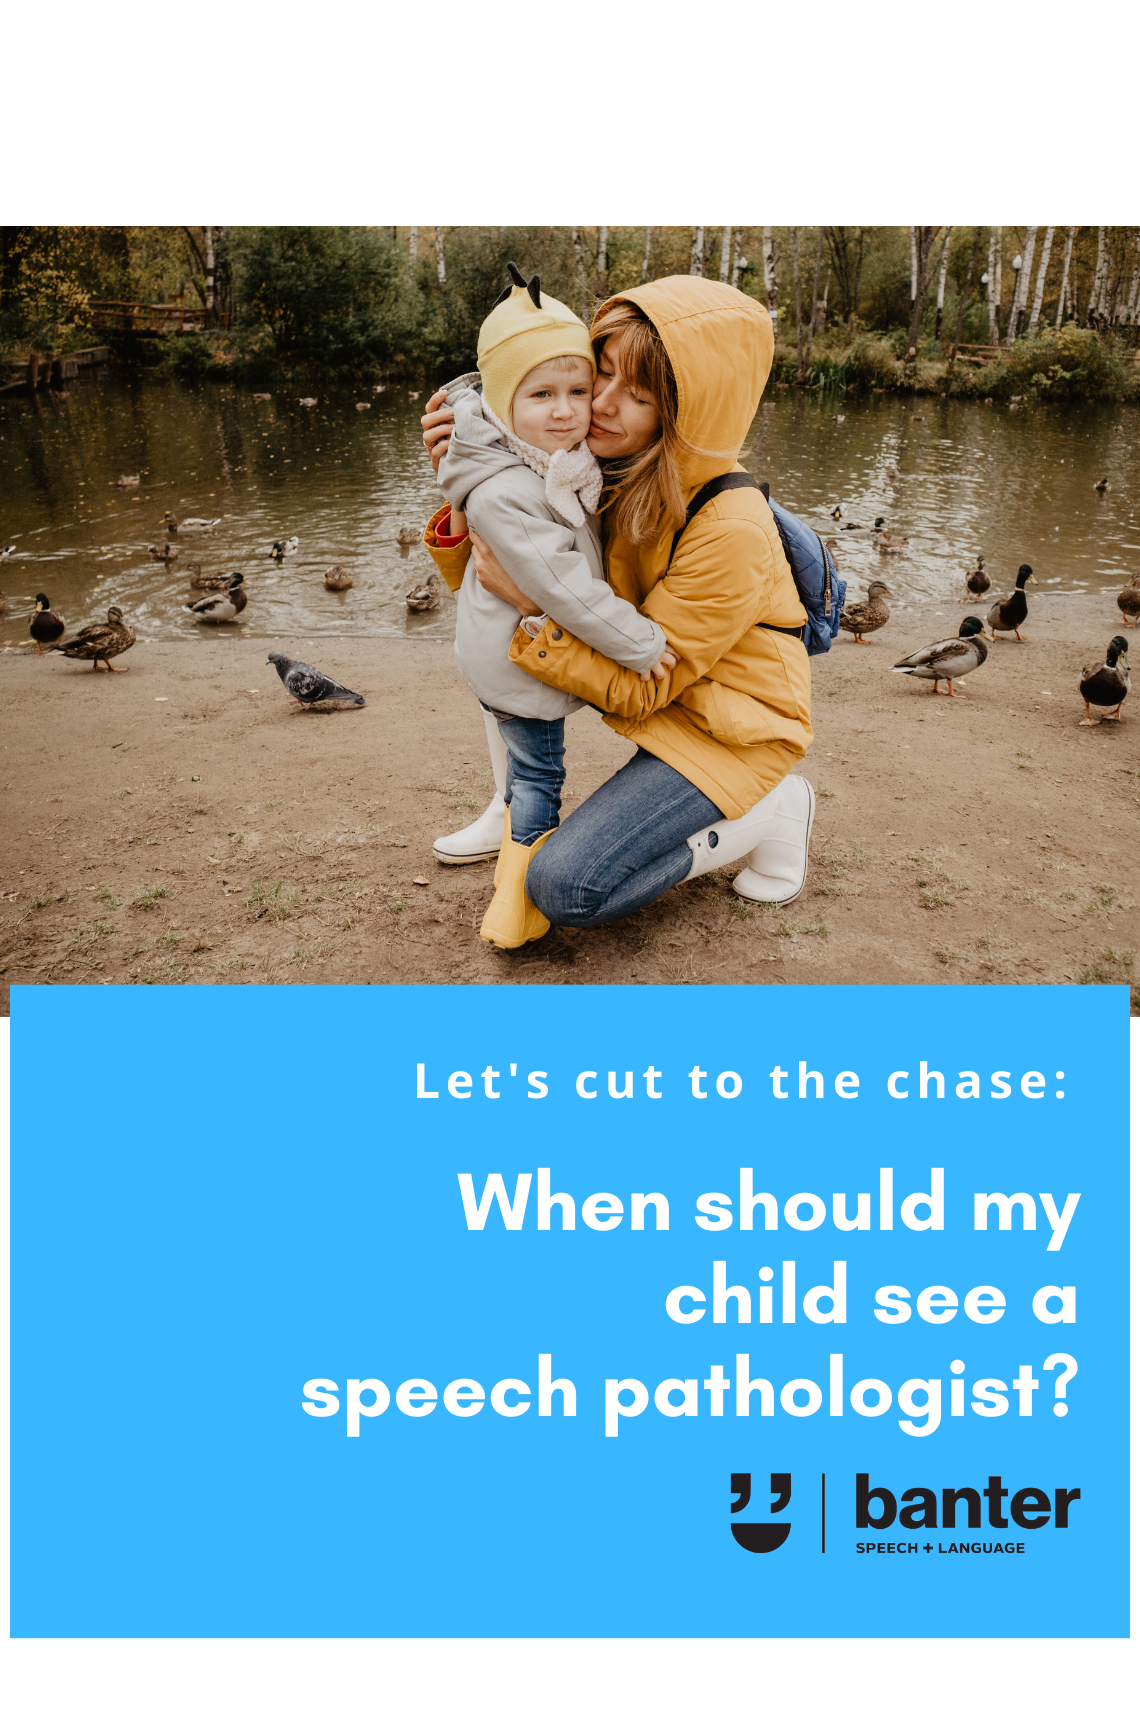 When should my child see a speech pathologist?